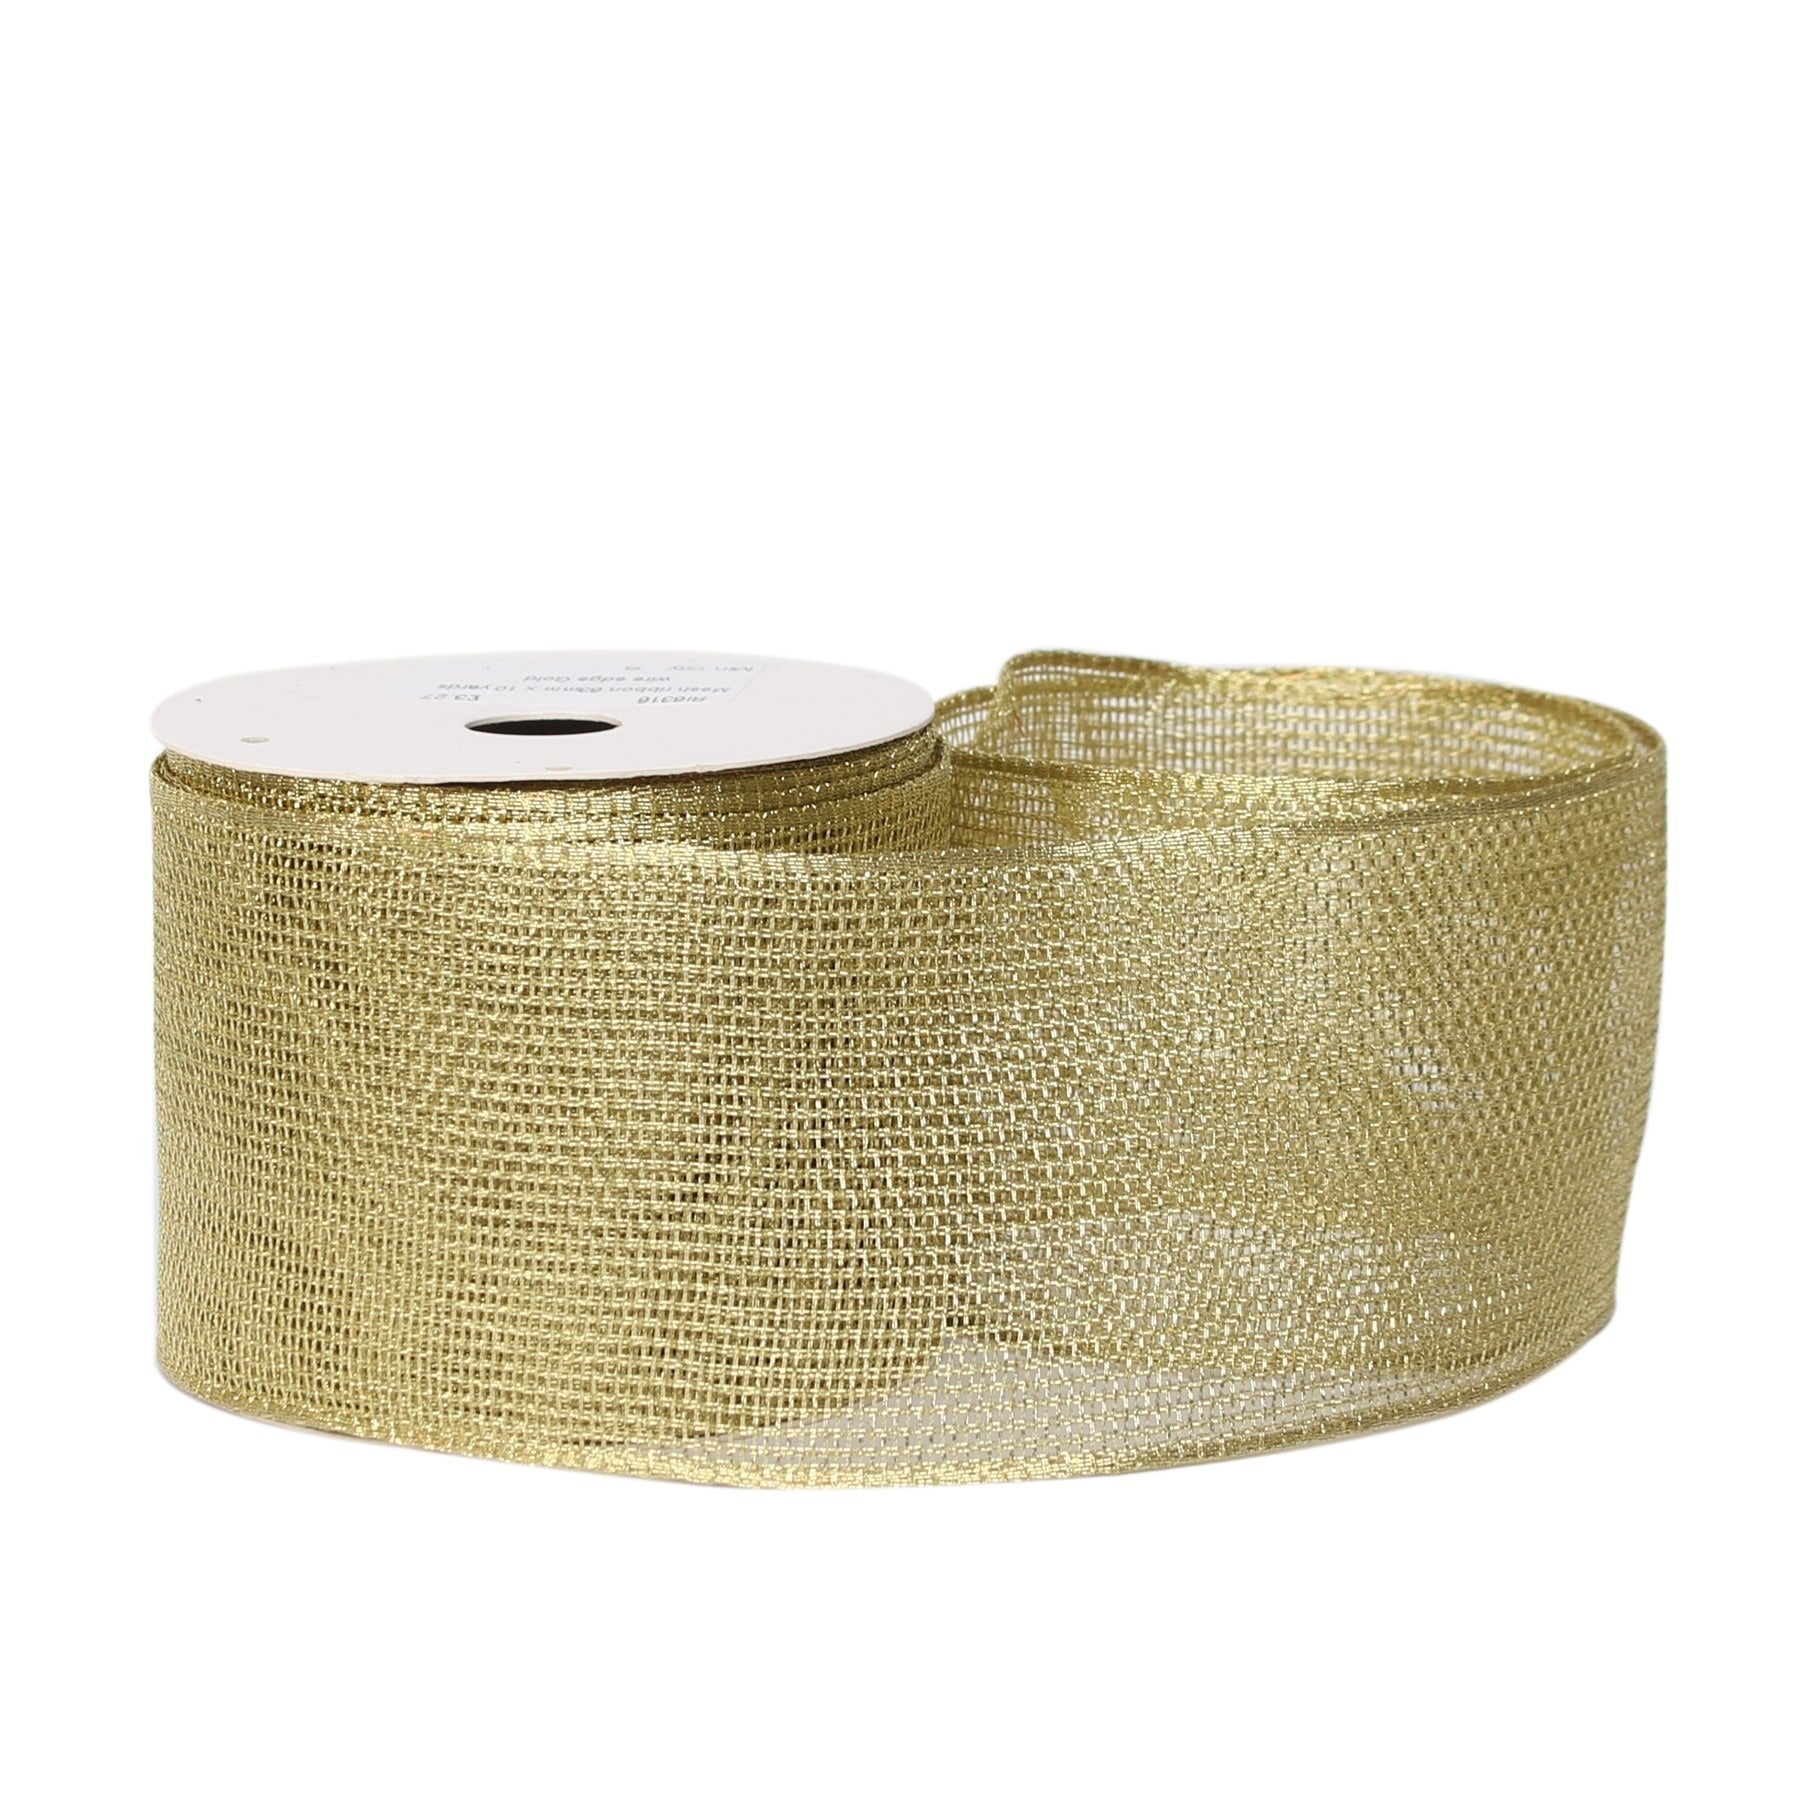 View Mesh ribbon 63mm x 10 yards wire edge Gold information